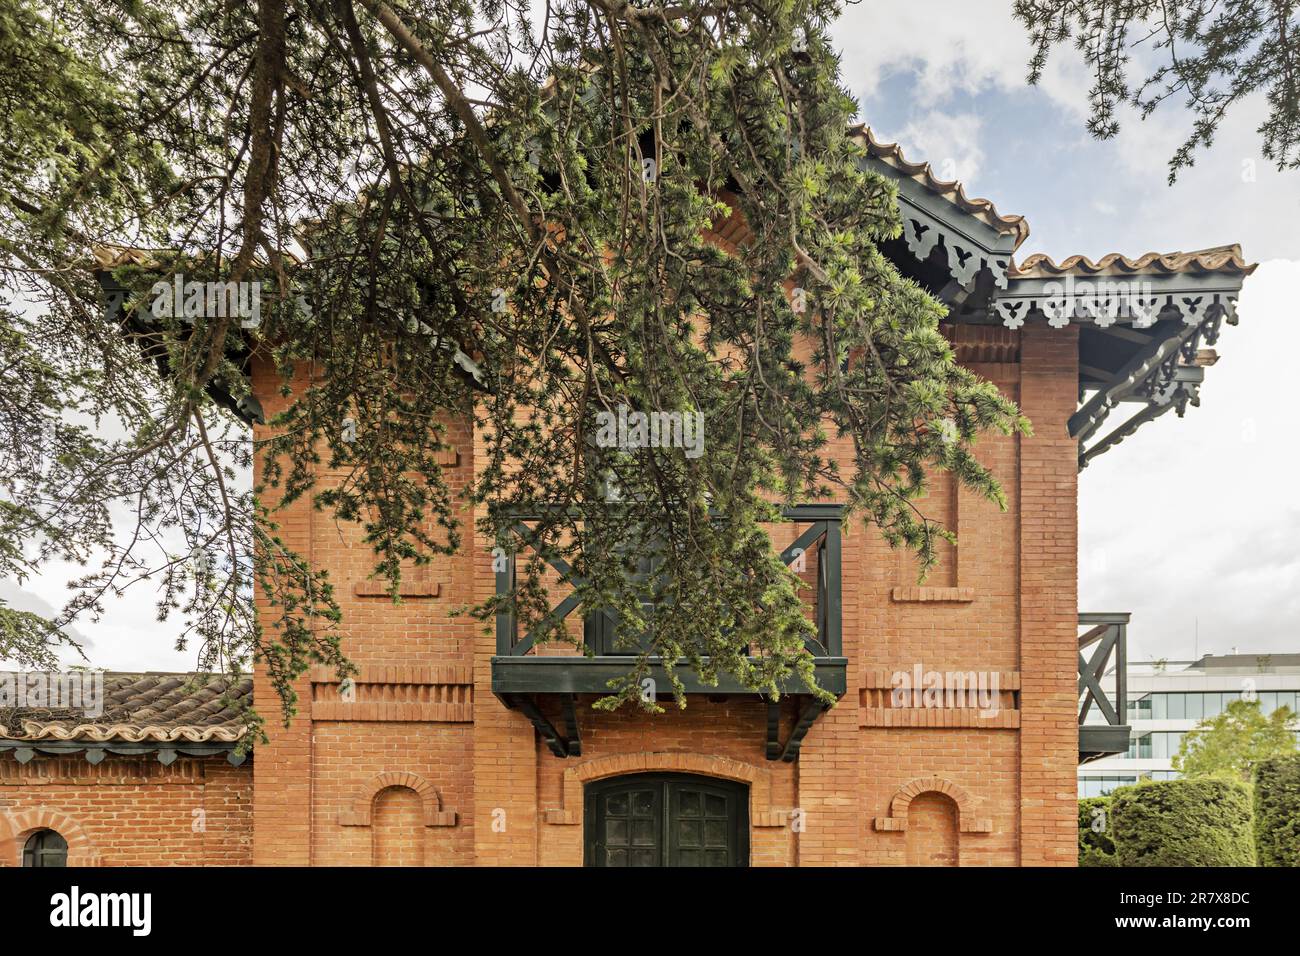 Facade of a vintage brick building with green balconies, gables on the roofs and pine branches in front Stock Photo